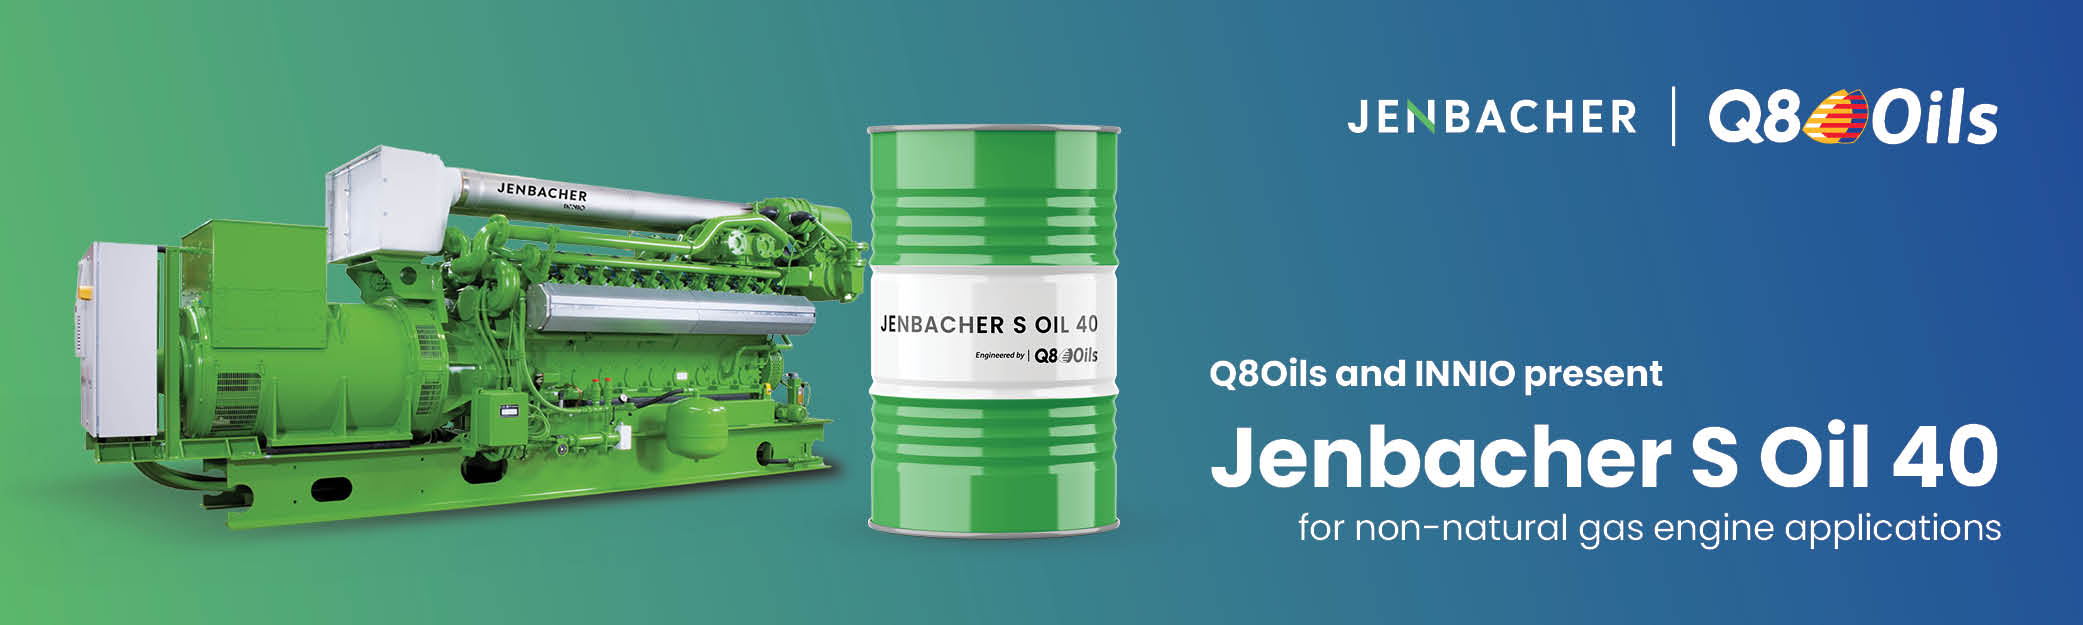 Q8Oils and INNIO launch high performing Jenbacher S Oil 40 for non-natural gas  engines - Official Q8Oils Website